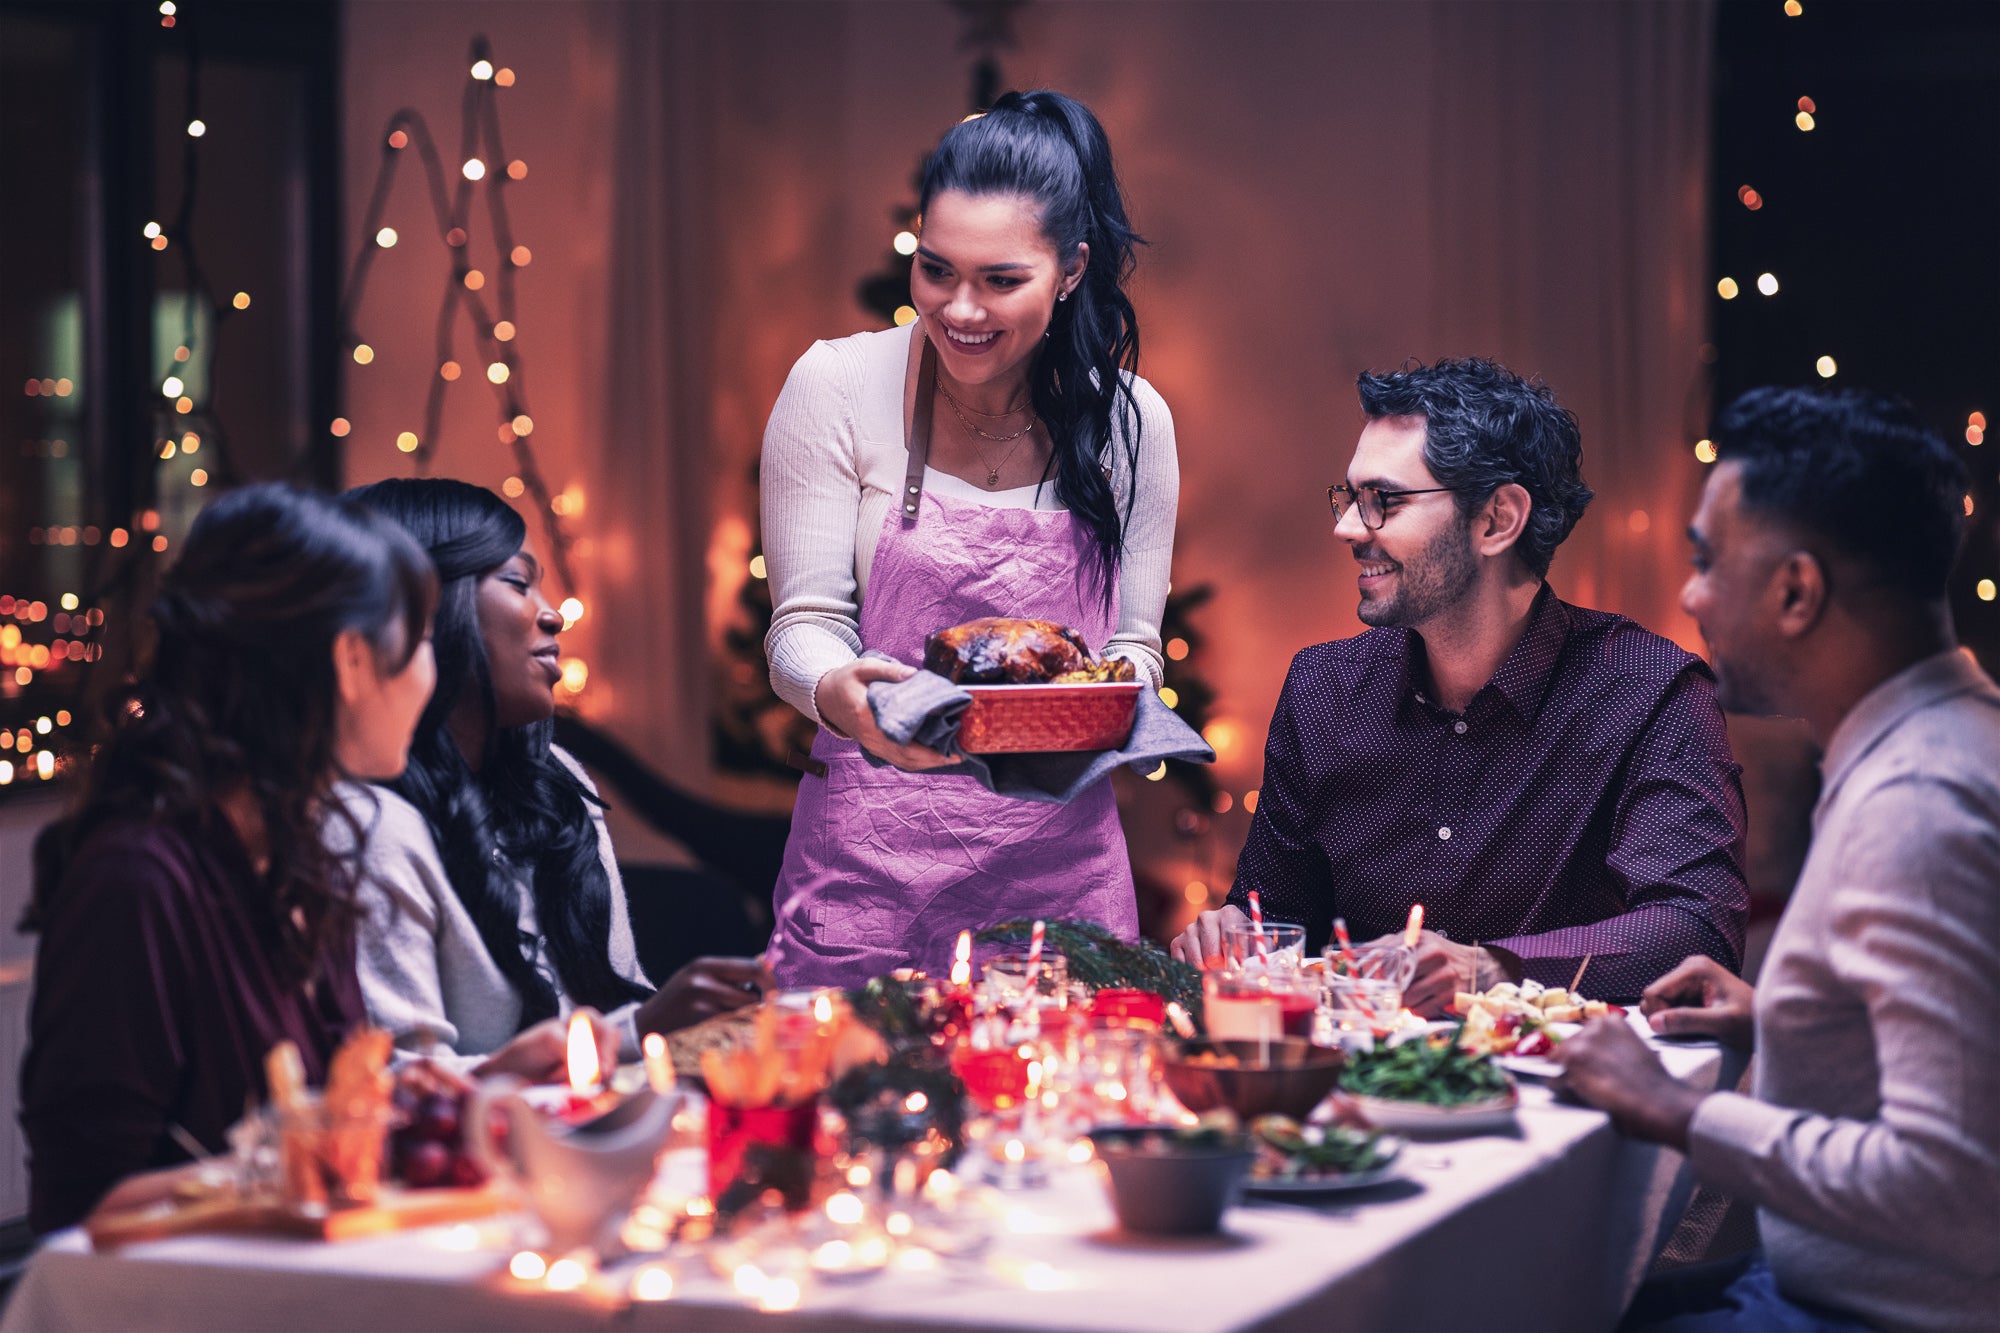 What Is the Connected Home, and How Can It Help You Host the Holidays?